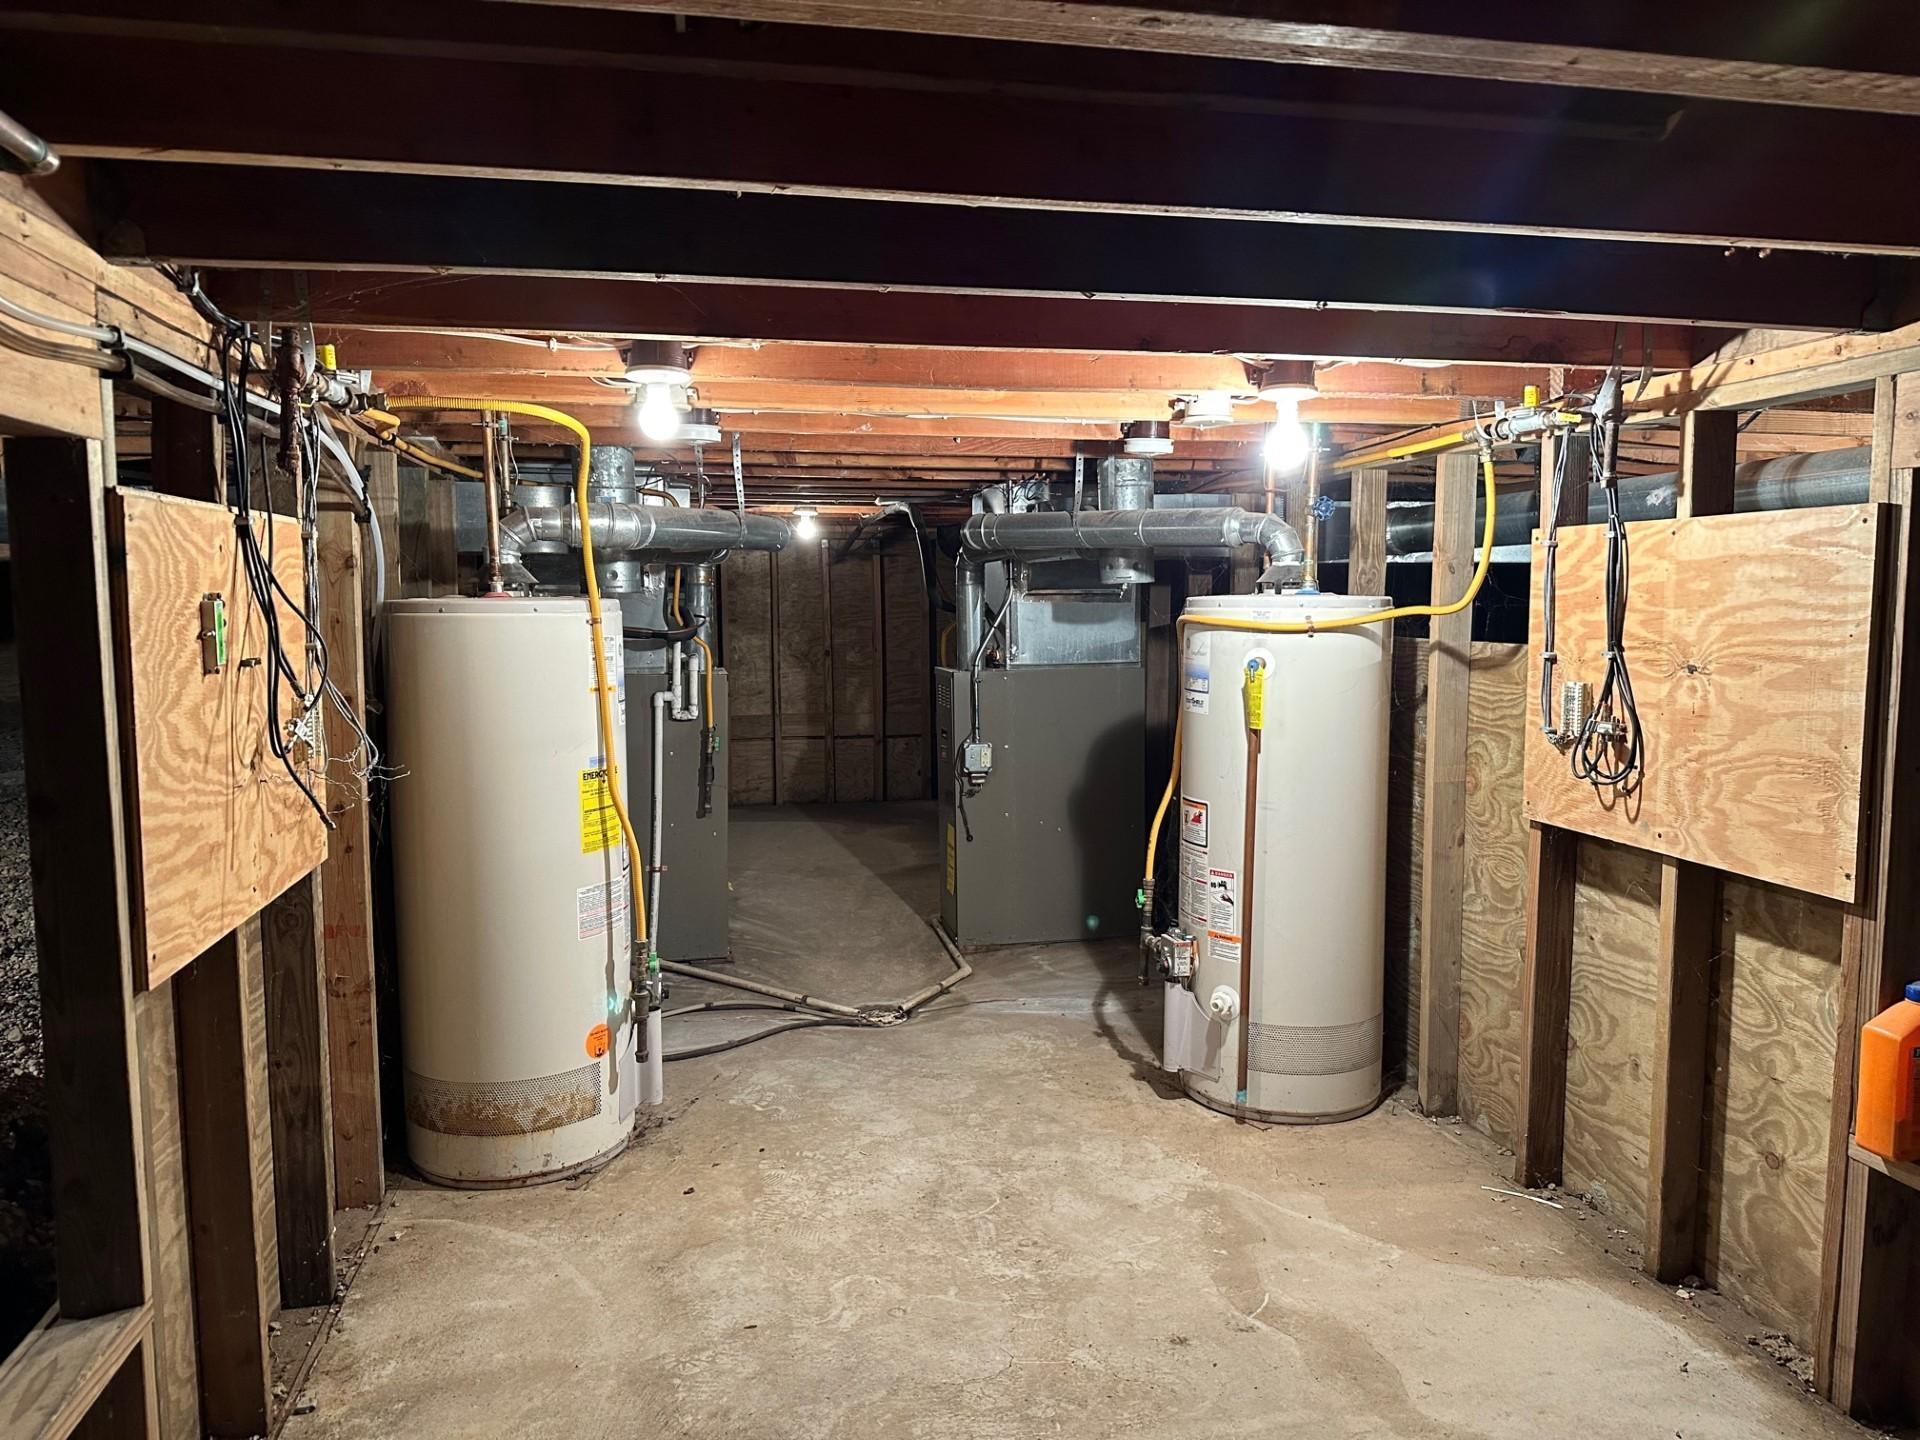 Basement headroom is about 5 1/2'. Furnaces and water heaters down in this space which can double as a storm shelter.